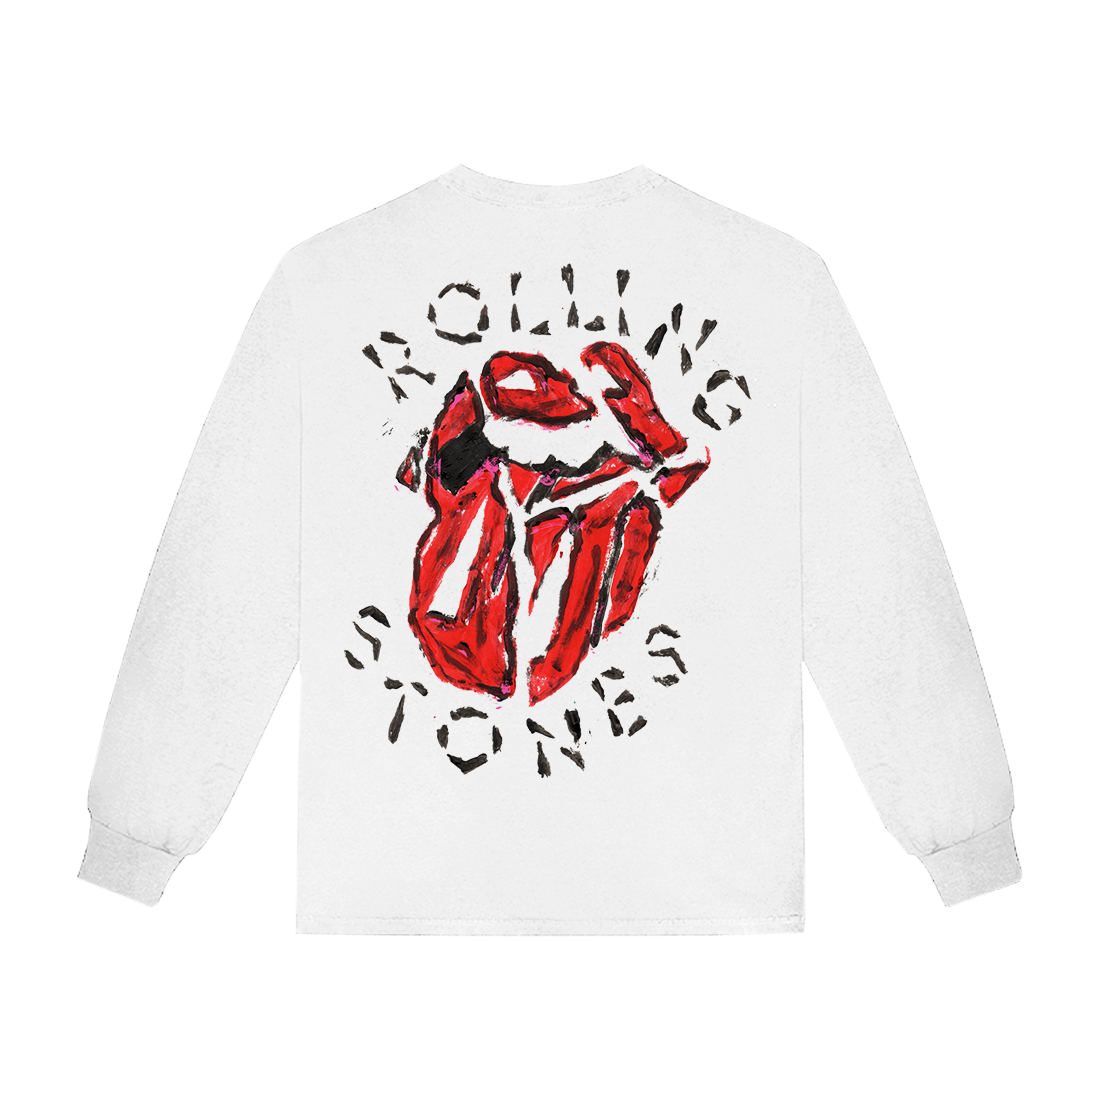 https://images.bravado.de/prod/product-assets/product-asset-data/rolling-stones-the/the-rolling-stones/products/504849/web/402329/image-thumb__402329__3000x3000_original/The-Rolling-Stones-Painted-Diamond-Tongue-White-Longsleeves-weiss-504849-402329.0c815a6d.png